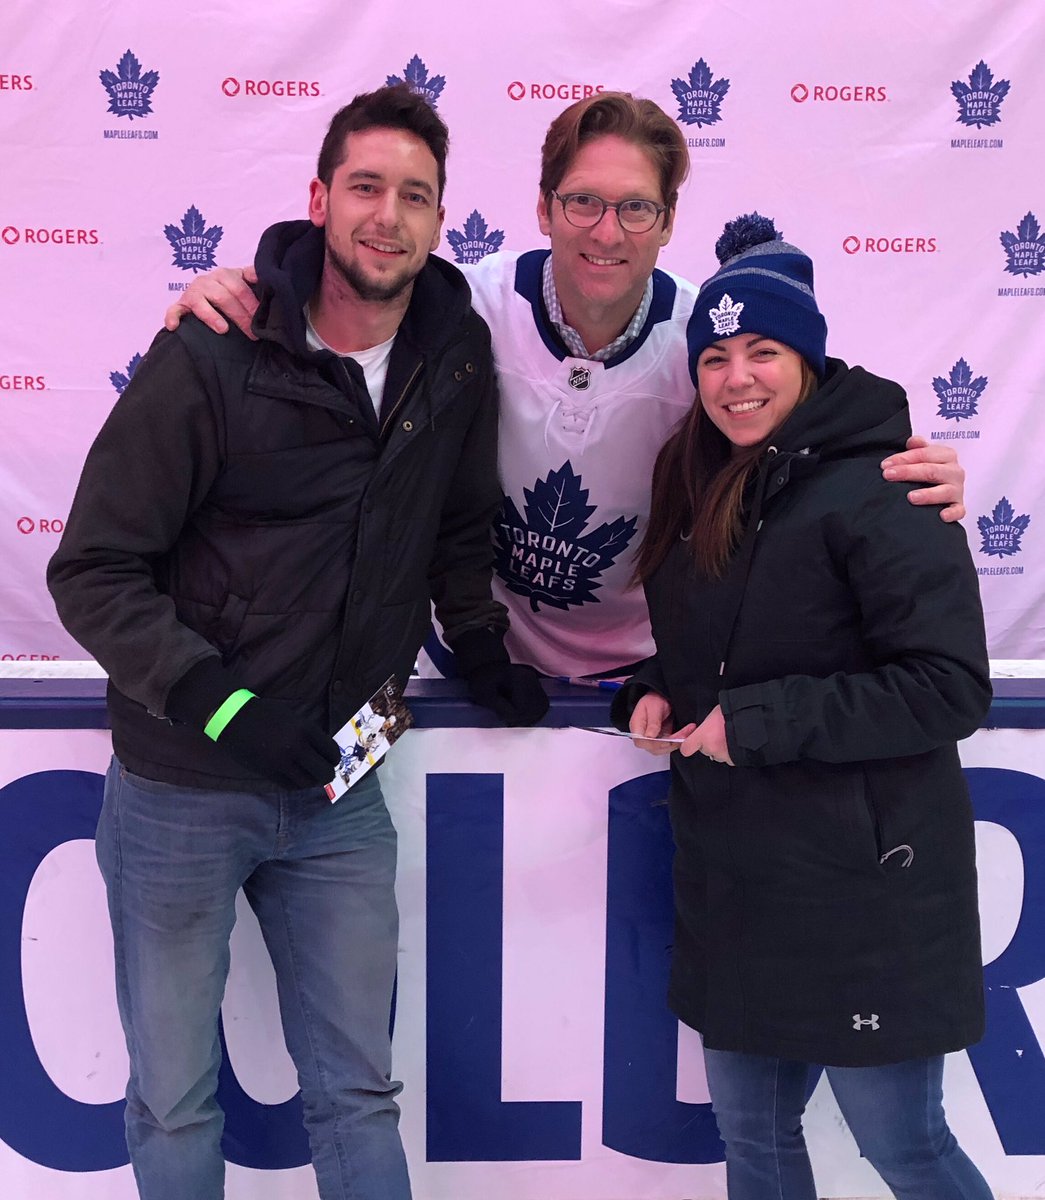 🏒Thank you @Rogers @ScotiabankArena & @LeafsAlumni #27 Shayne Corson!! The kids now tower over me, and I didn’t have to lace any skates ..... so much fun to be out for a family skate - it’s been far too long! Many thanks for such a special opportunity! 🏒 🇨🇦 #RogersMoments #TO